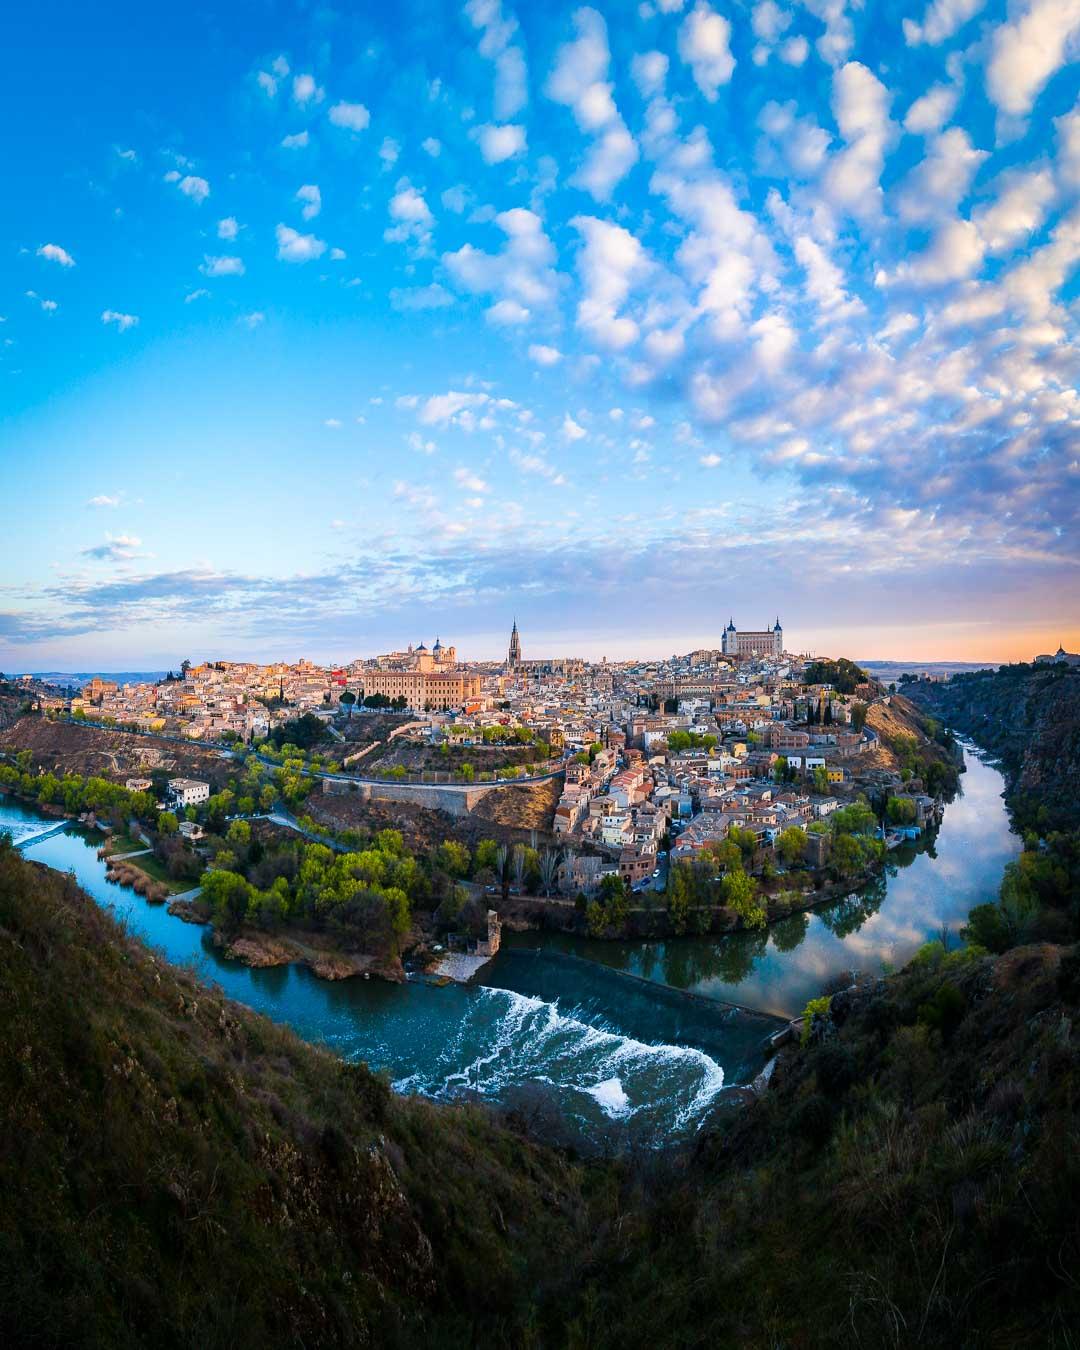 looking for the best things to do in toledo spain? go watch the sunrise at the mirador del valle